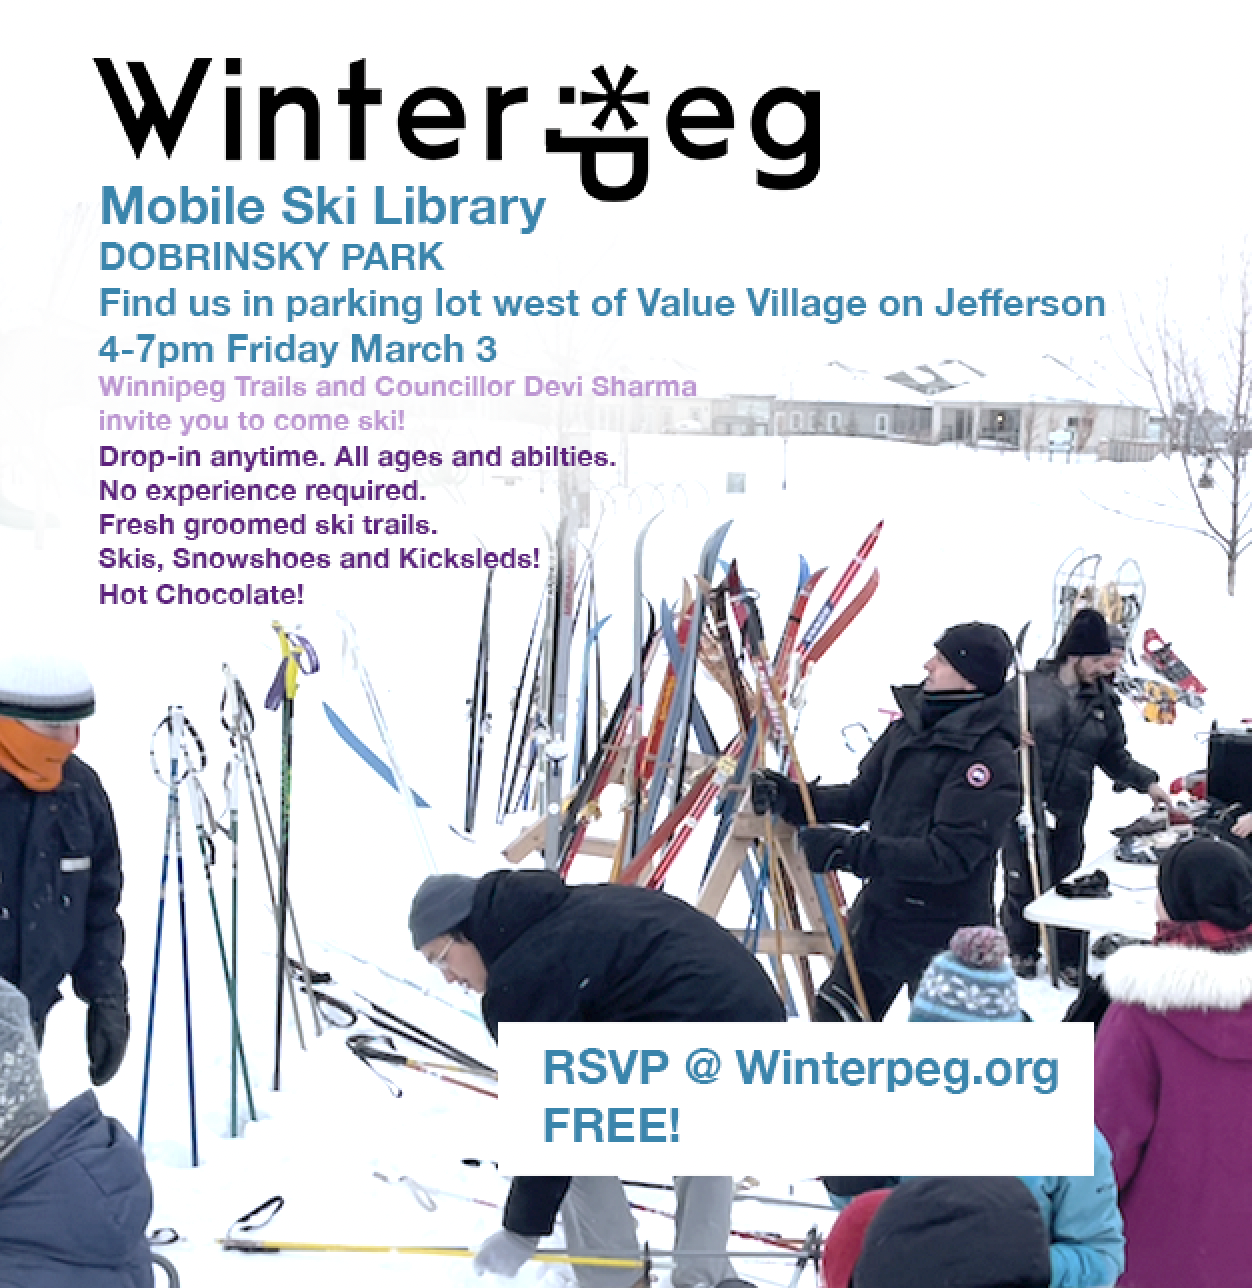 Poster showing all the details of the event and some people getting skis